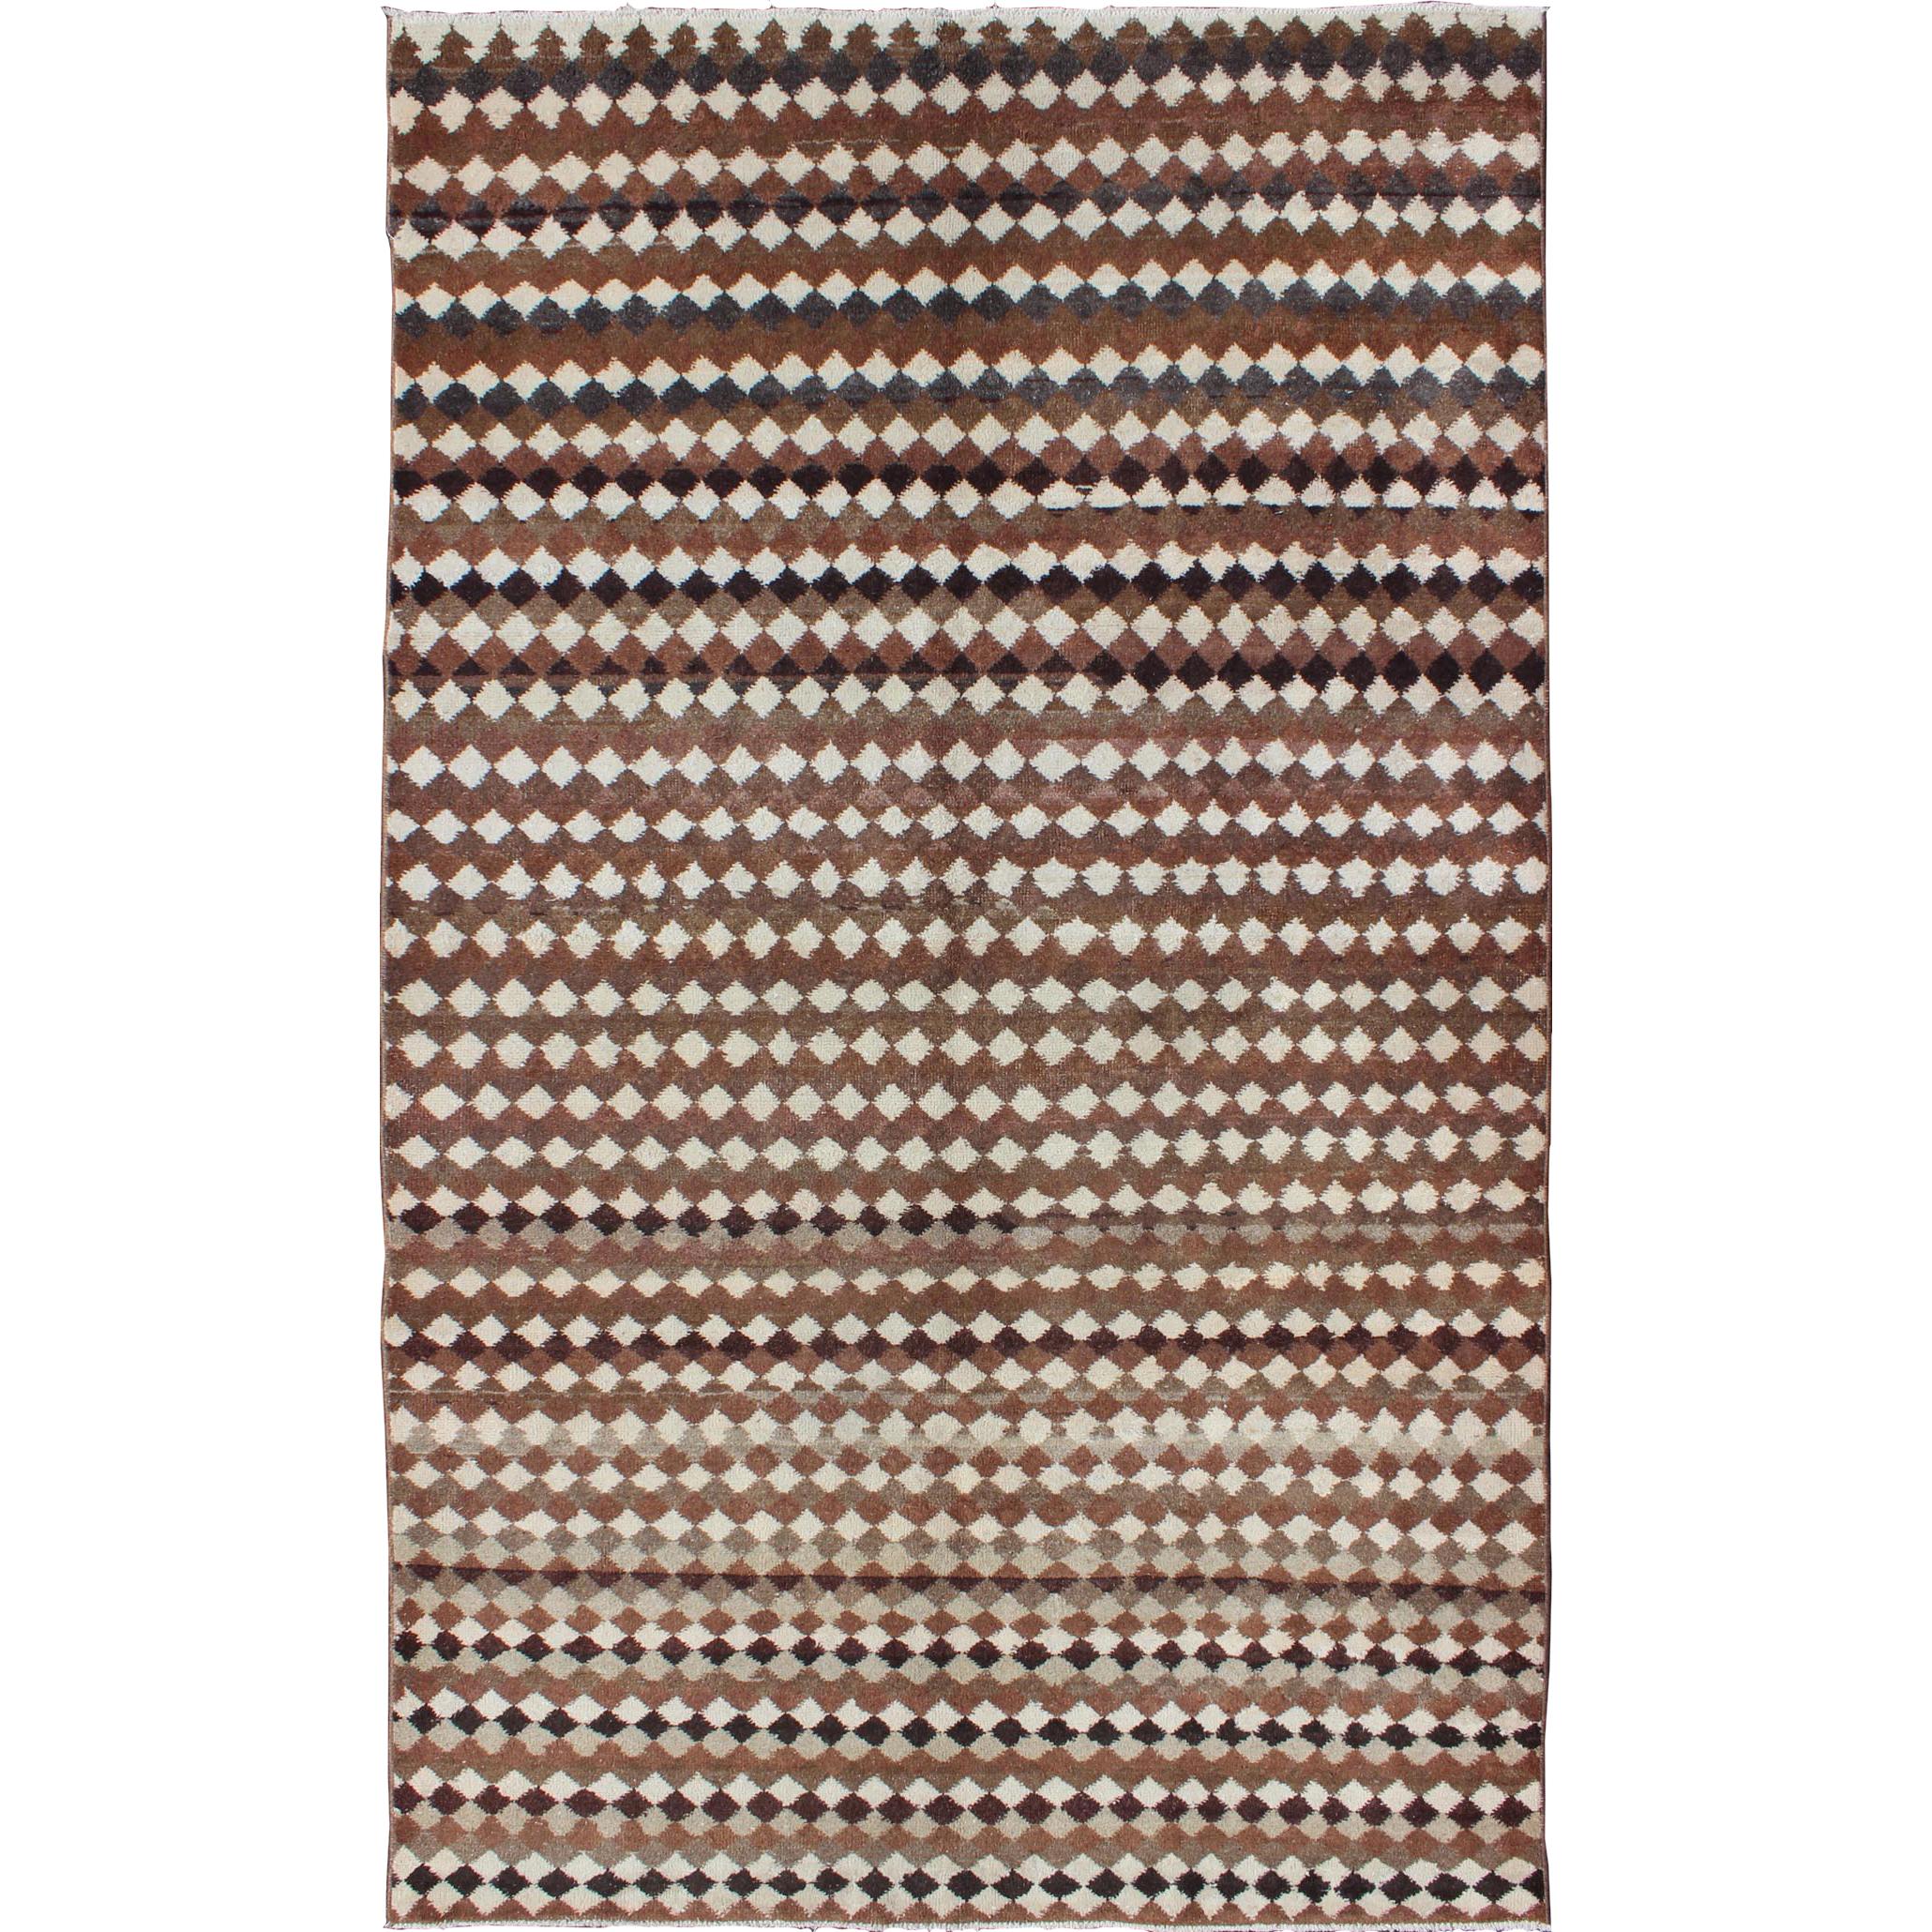 Mid-Century Modern Rug with All-Over Checkerboard Pattern in Multi Brown Tones For Sale